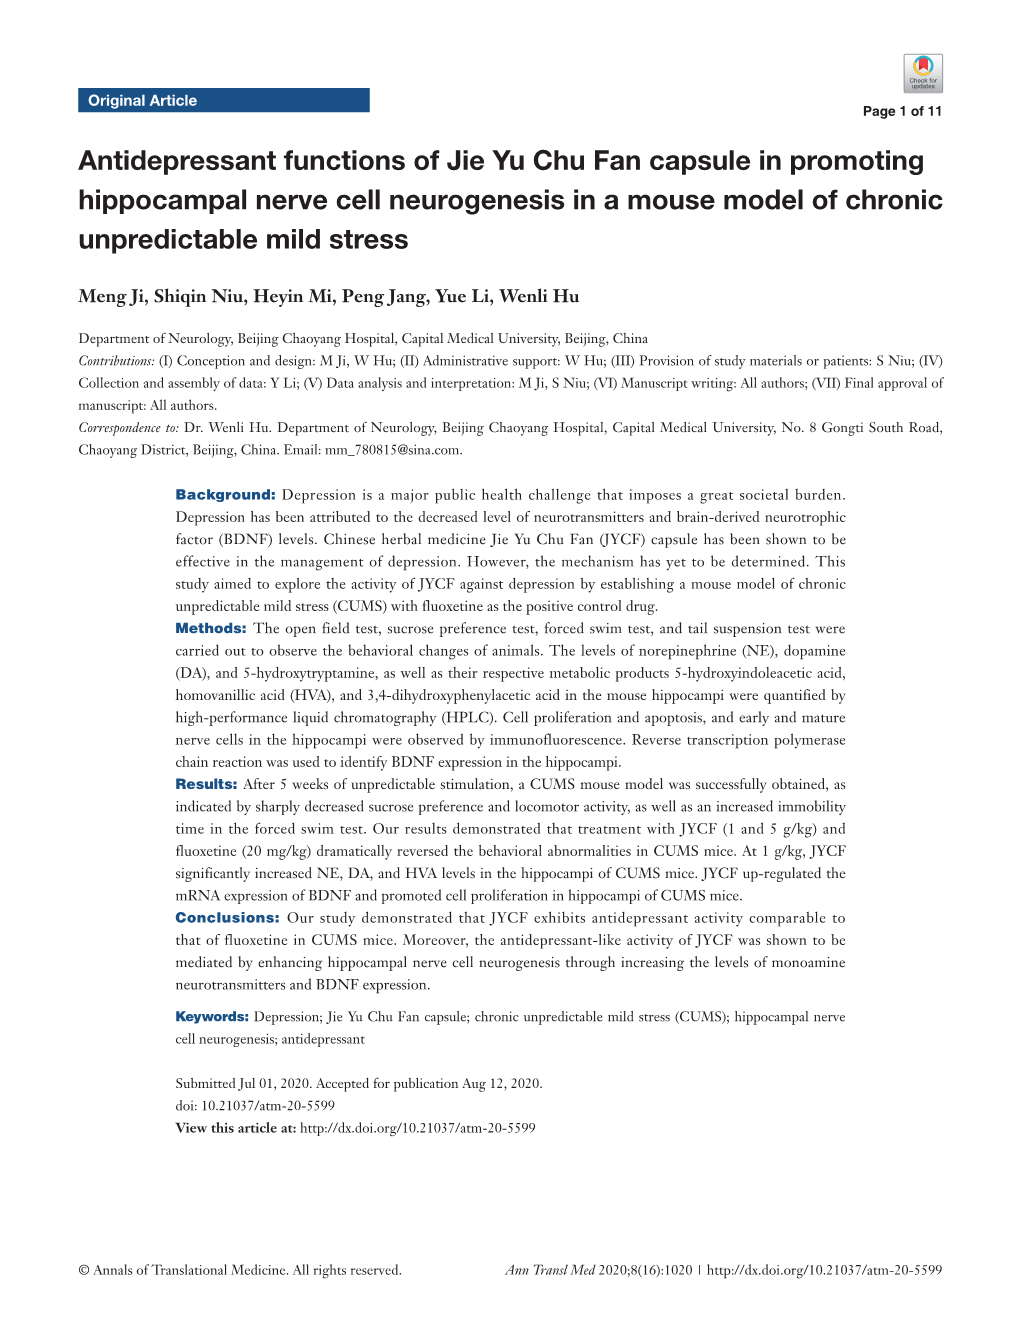 Antidepressant Functions of Jie Yu Chu Fan Capsule in Promoting Hippocampal Nerve Cell Neurogenesis in a Mouse Model of Chronic Unpredictable Mild Stress